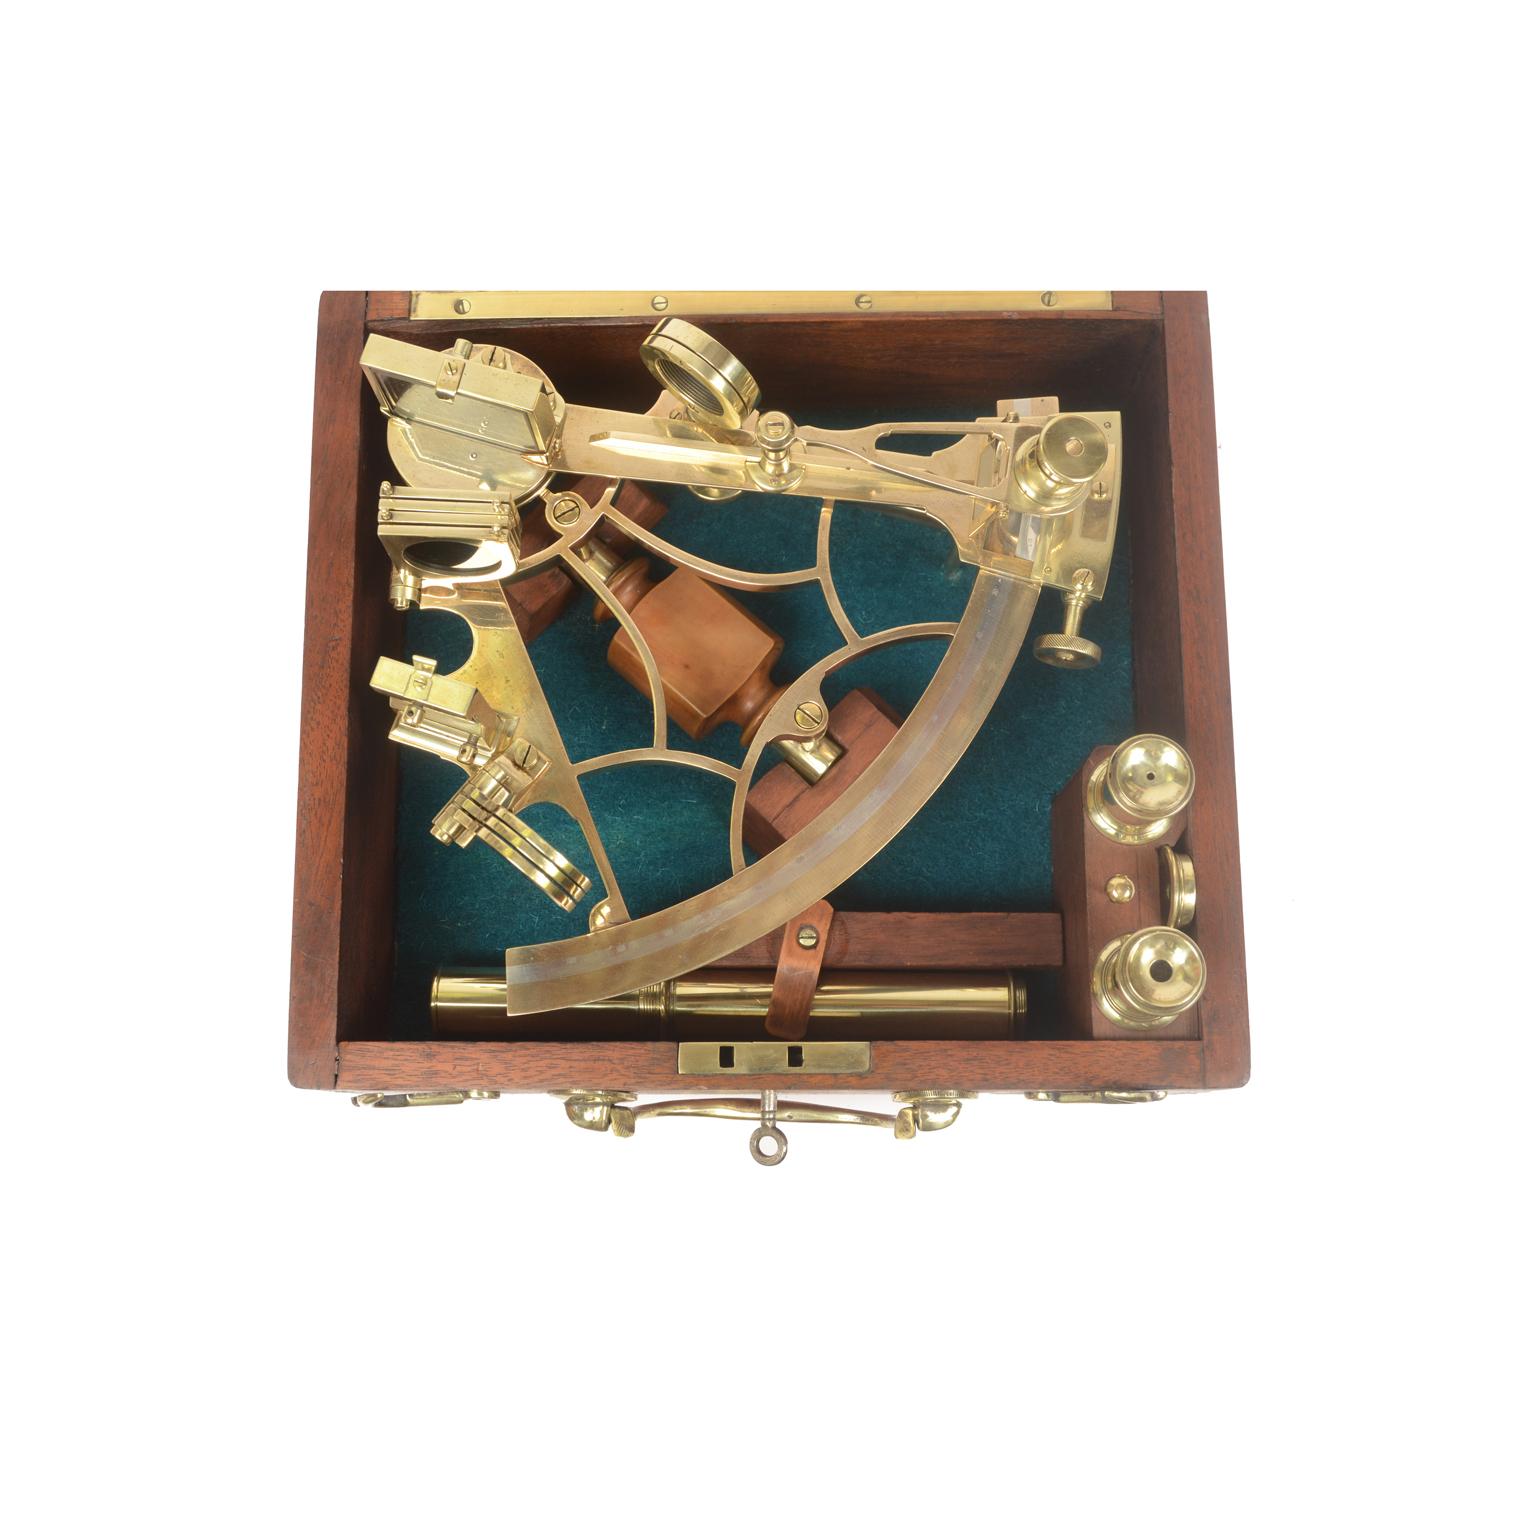 British Brass Sextant Made in the Mid-19th Century in its Mahogany Box